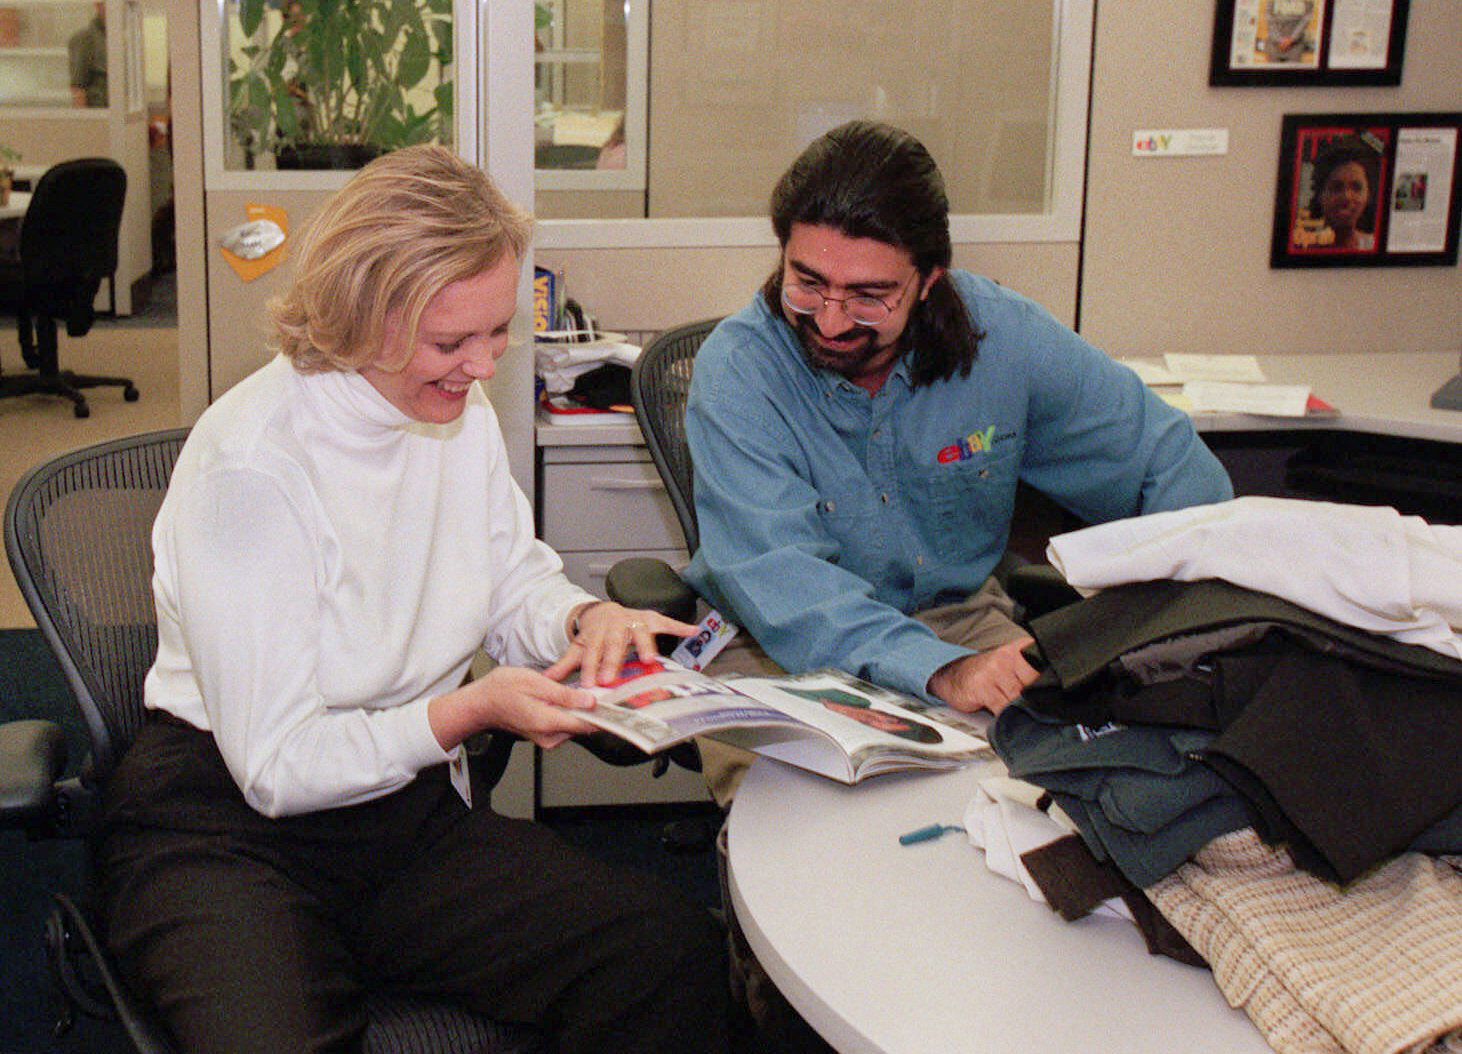 On this date in 1995, the online auction site eBay was founded in San Jose, California, by Pierre Omidyar under the name "AuctionWeb." In this 1999 file photo, then eBay chief executive officer Meg Whitman, left, and Pierre Omidyar, eBay's founder and chairman of the board, leaf through a magazine at the company's headquarters in San Jose, Calif.  (AP Photo/Randi Lynn Beach, file)